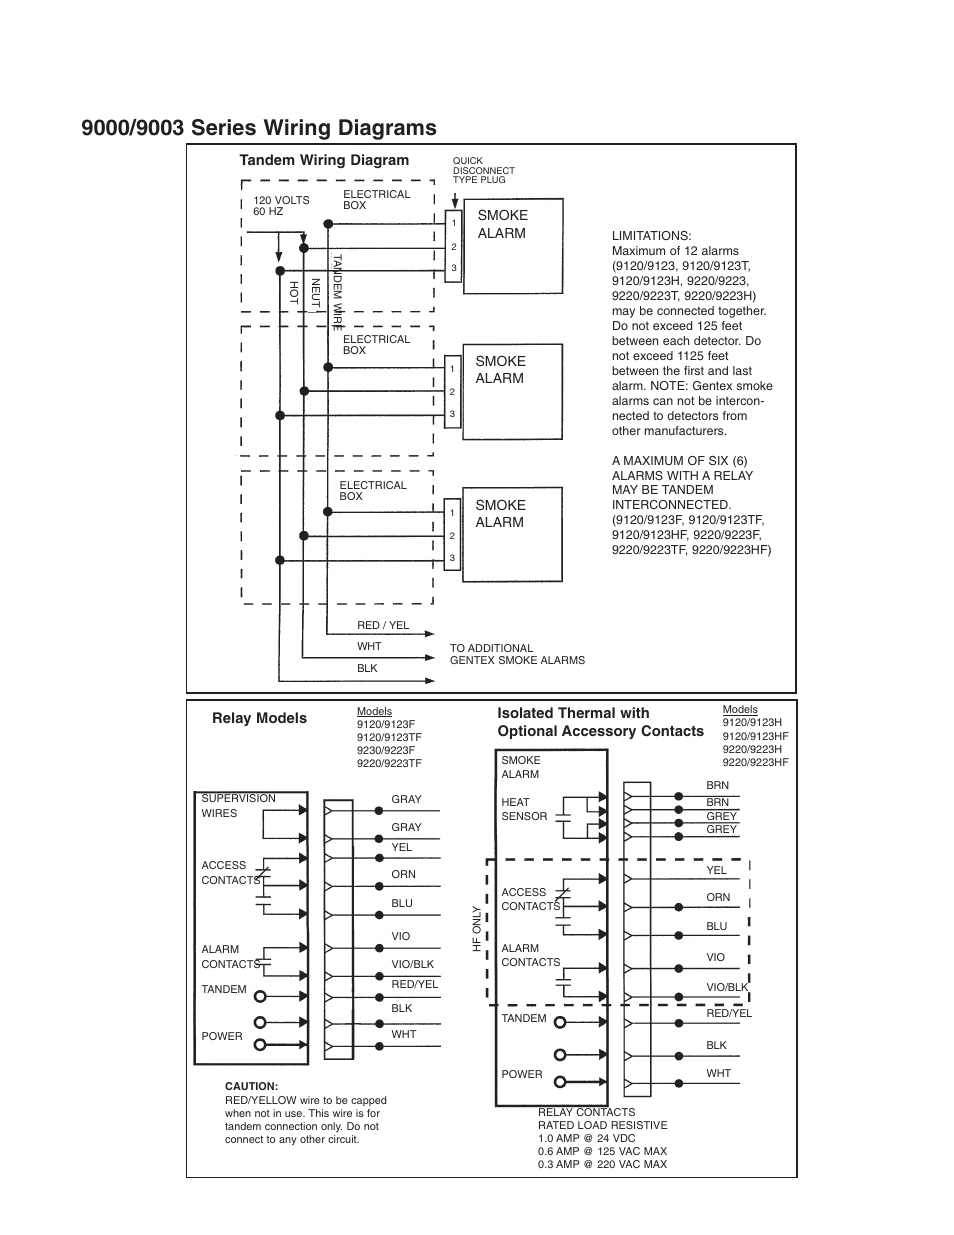 Smoke alarm, Tandem wiring diagram relay models, Isolated thermal with